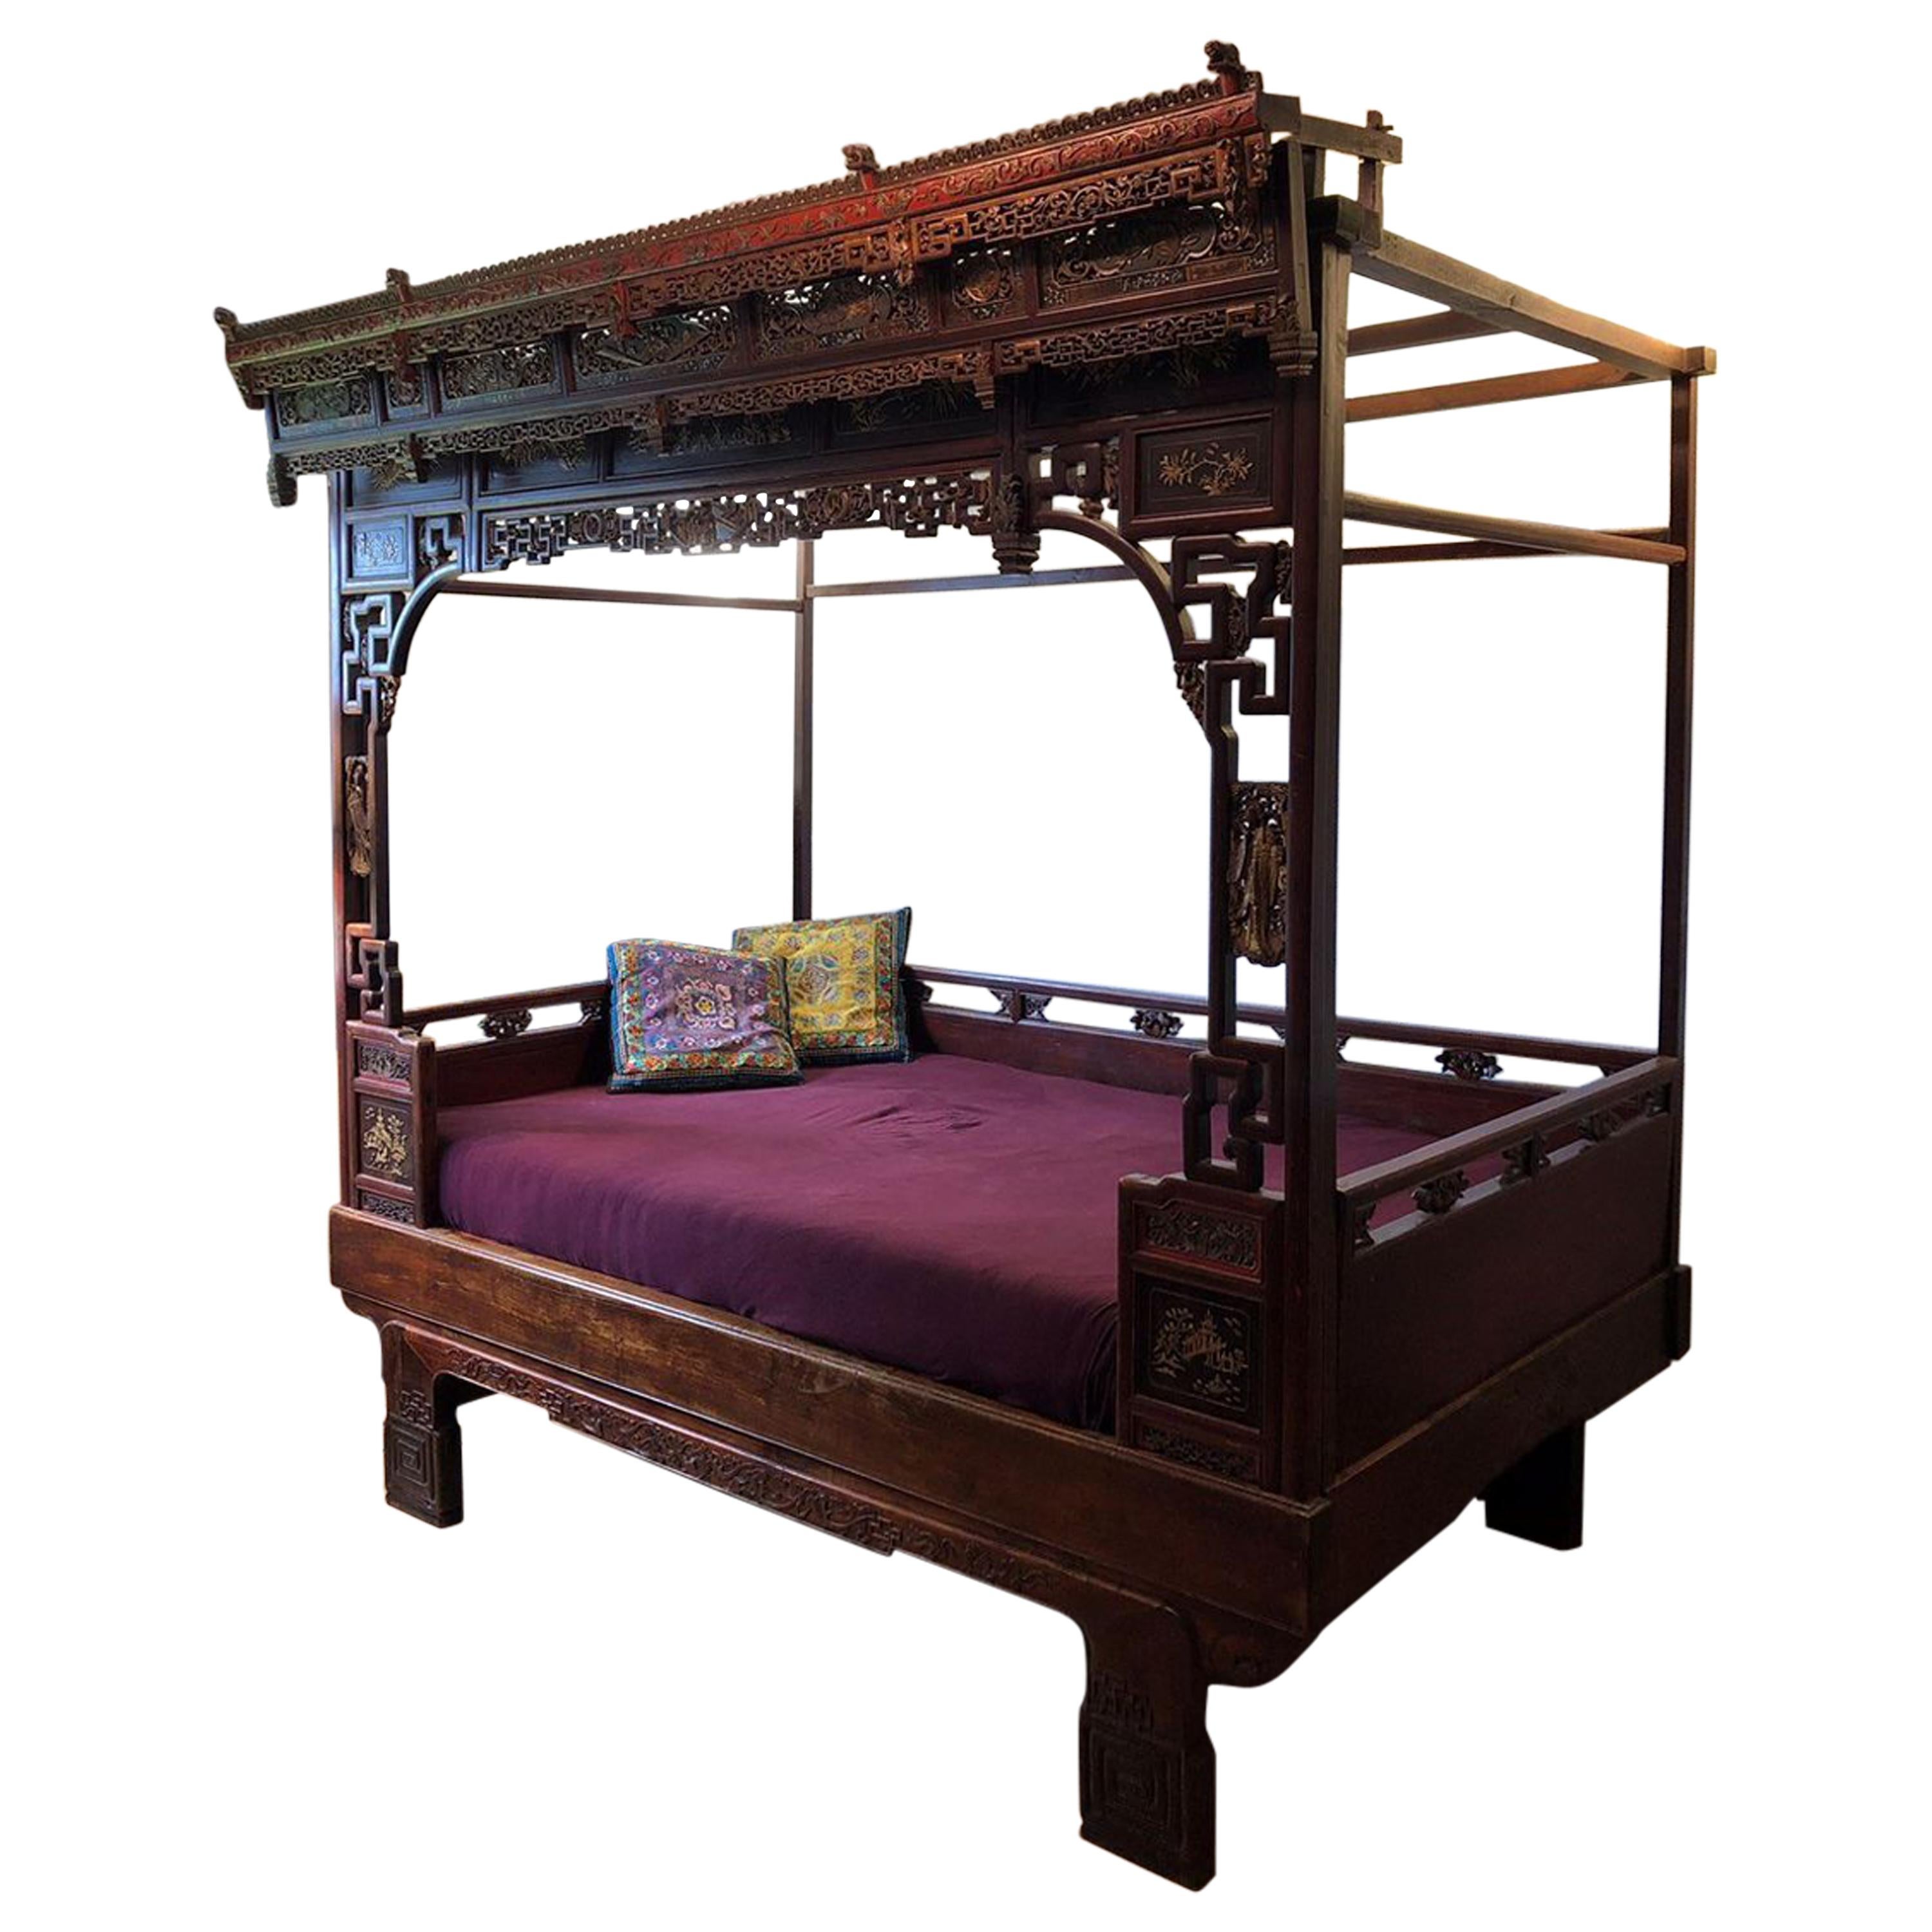 Antique Princess Large Carved Bed, China circa 1890, End of the Qing Dynasty